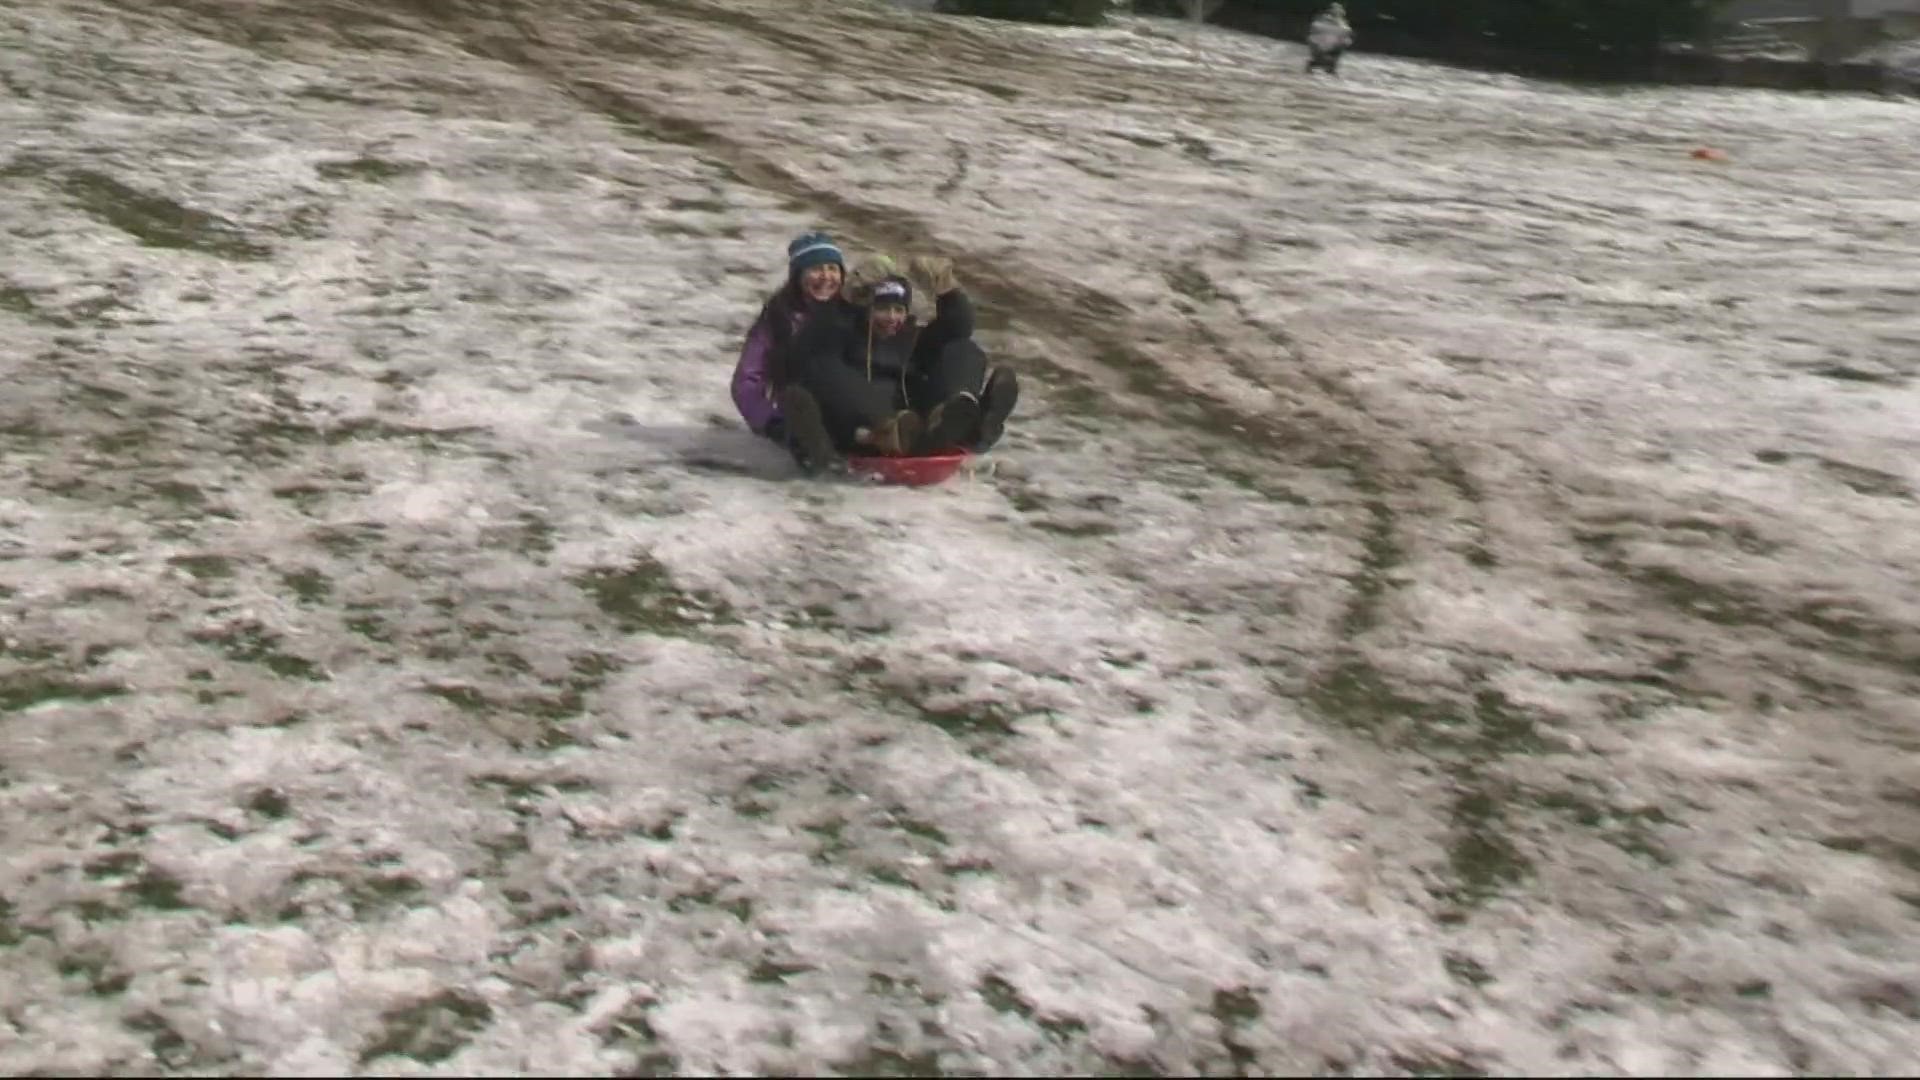 Vancouver’s Sorenson Park has an epic sledding hill, and kids were out bright and early to take advantage of it.